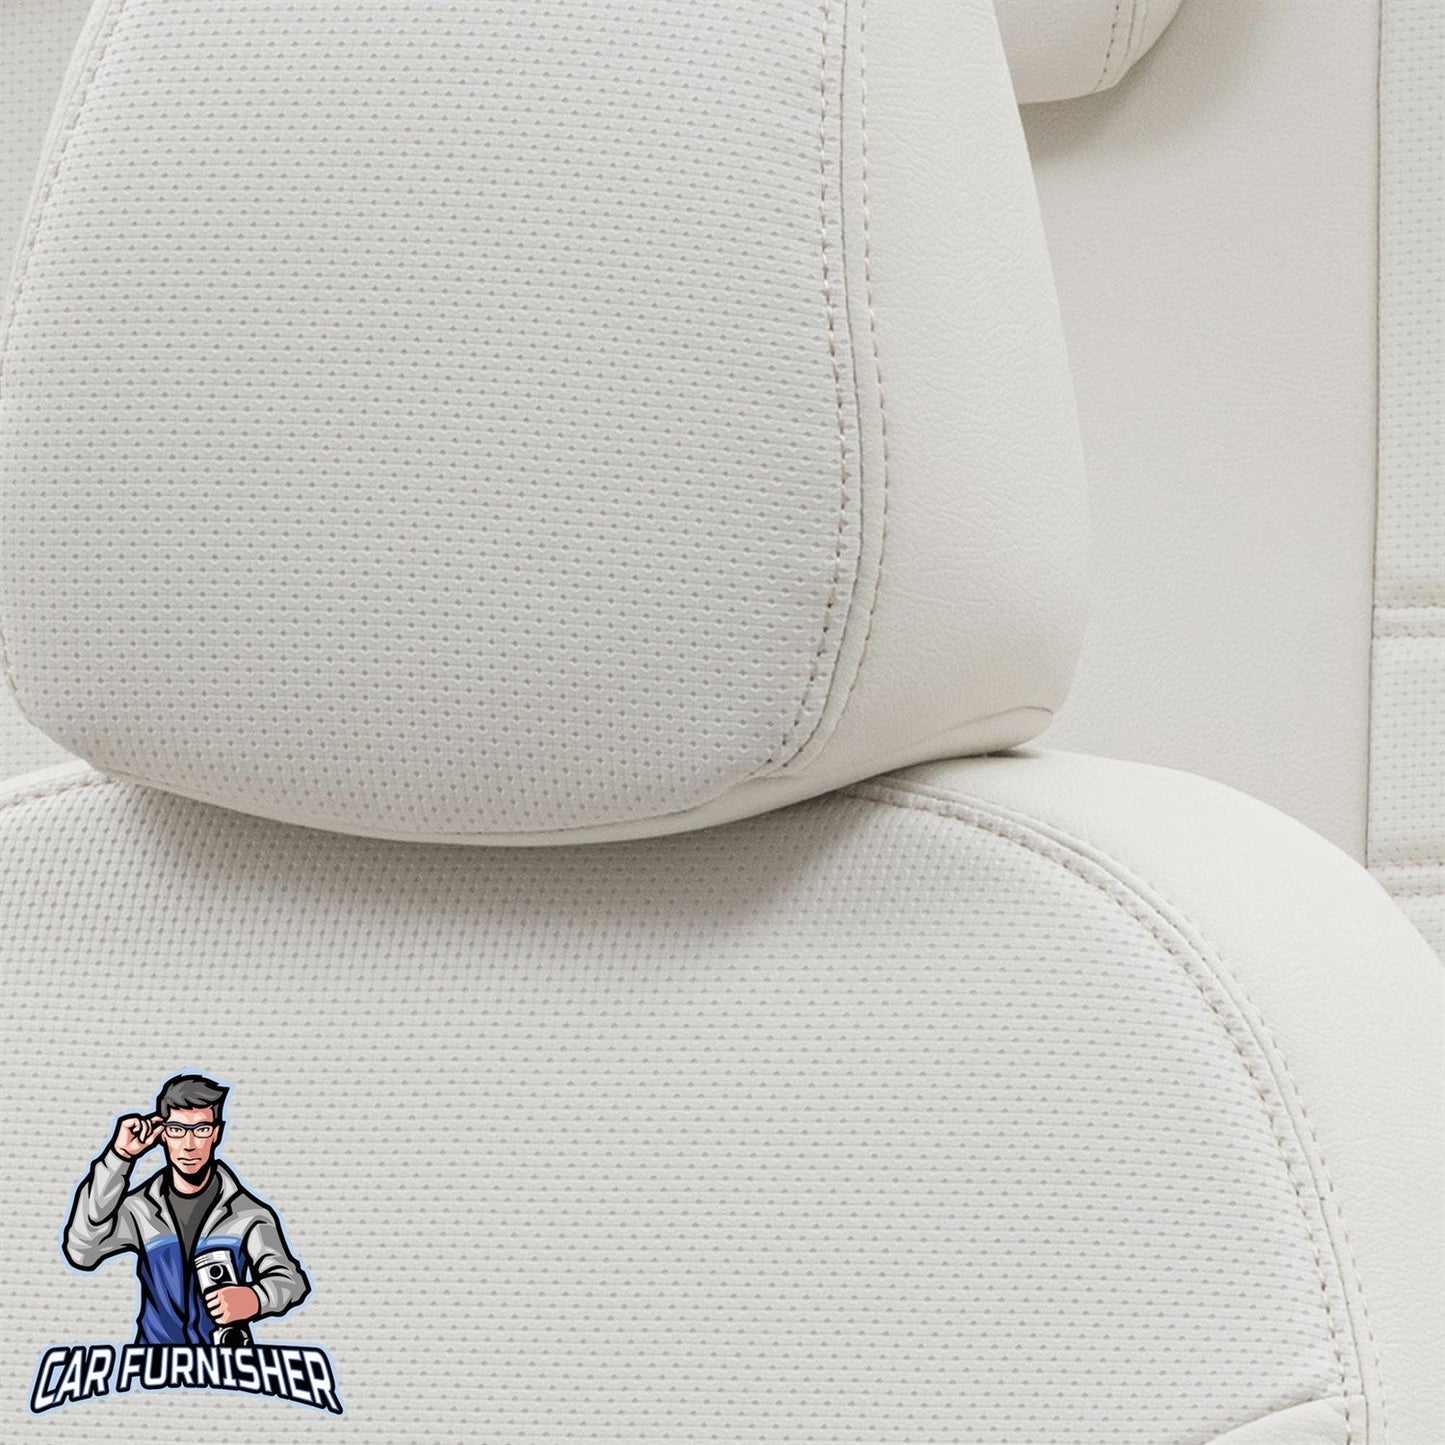 Toyota Yaris Seat Cover New York Leather Design Ivory Leather